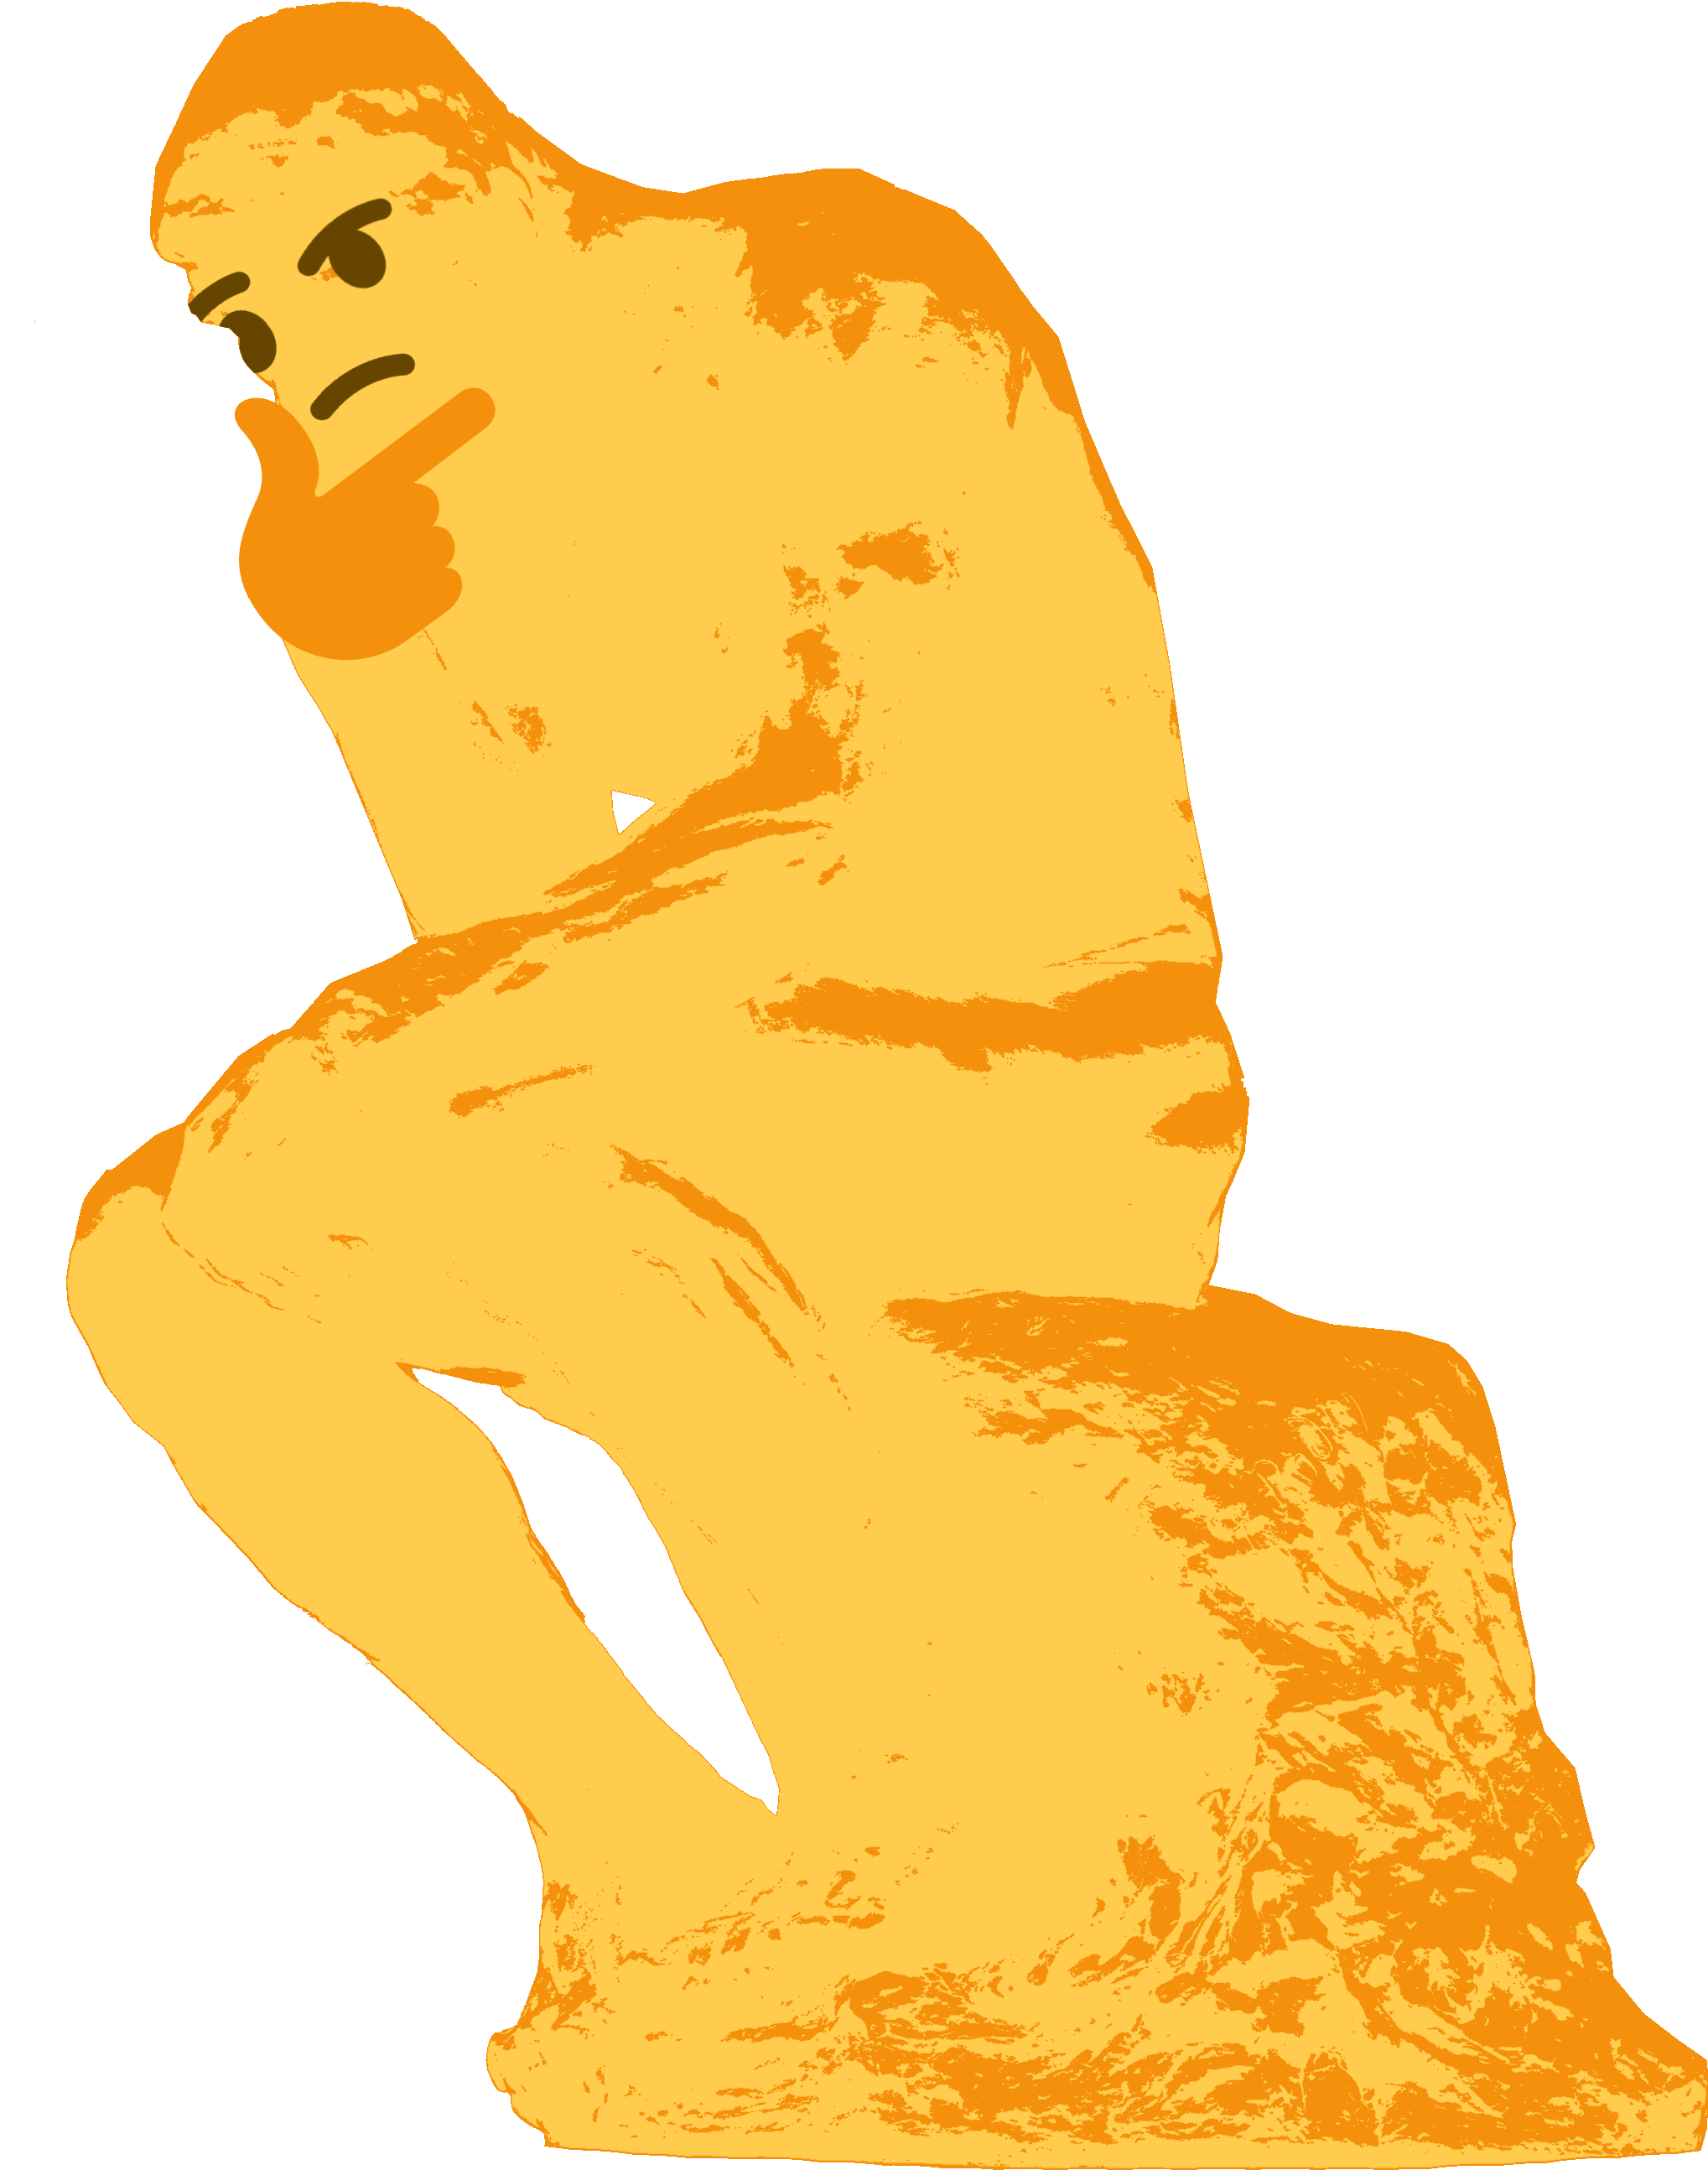 Download and share clipart about Emoji Thought The Thinker Sticker Internet...